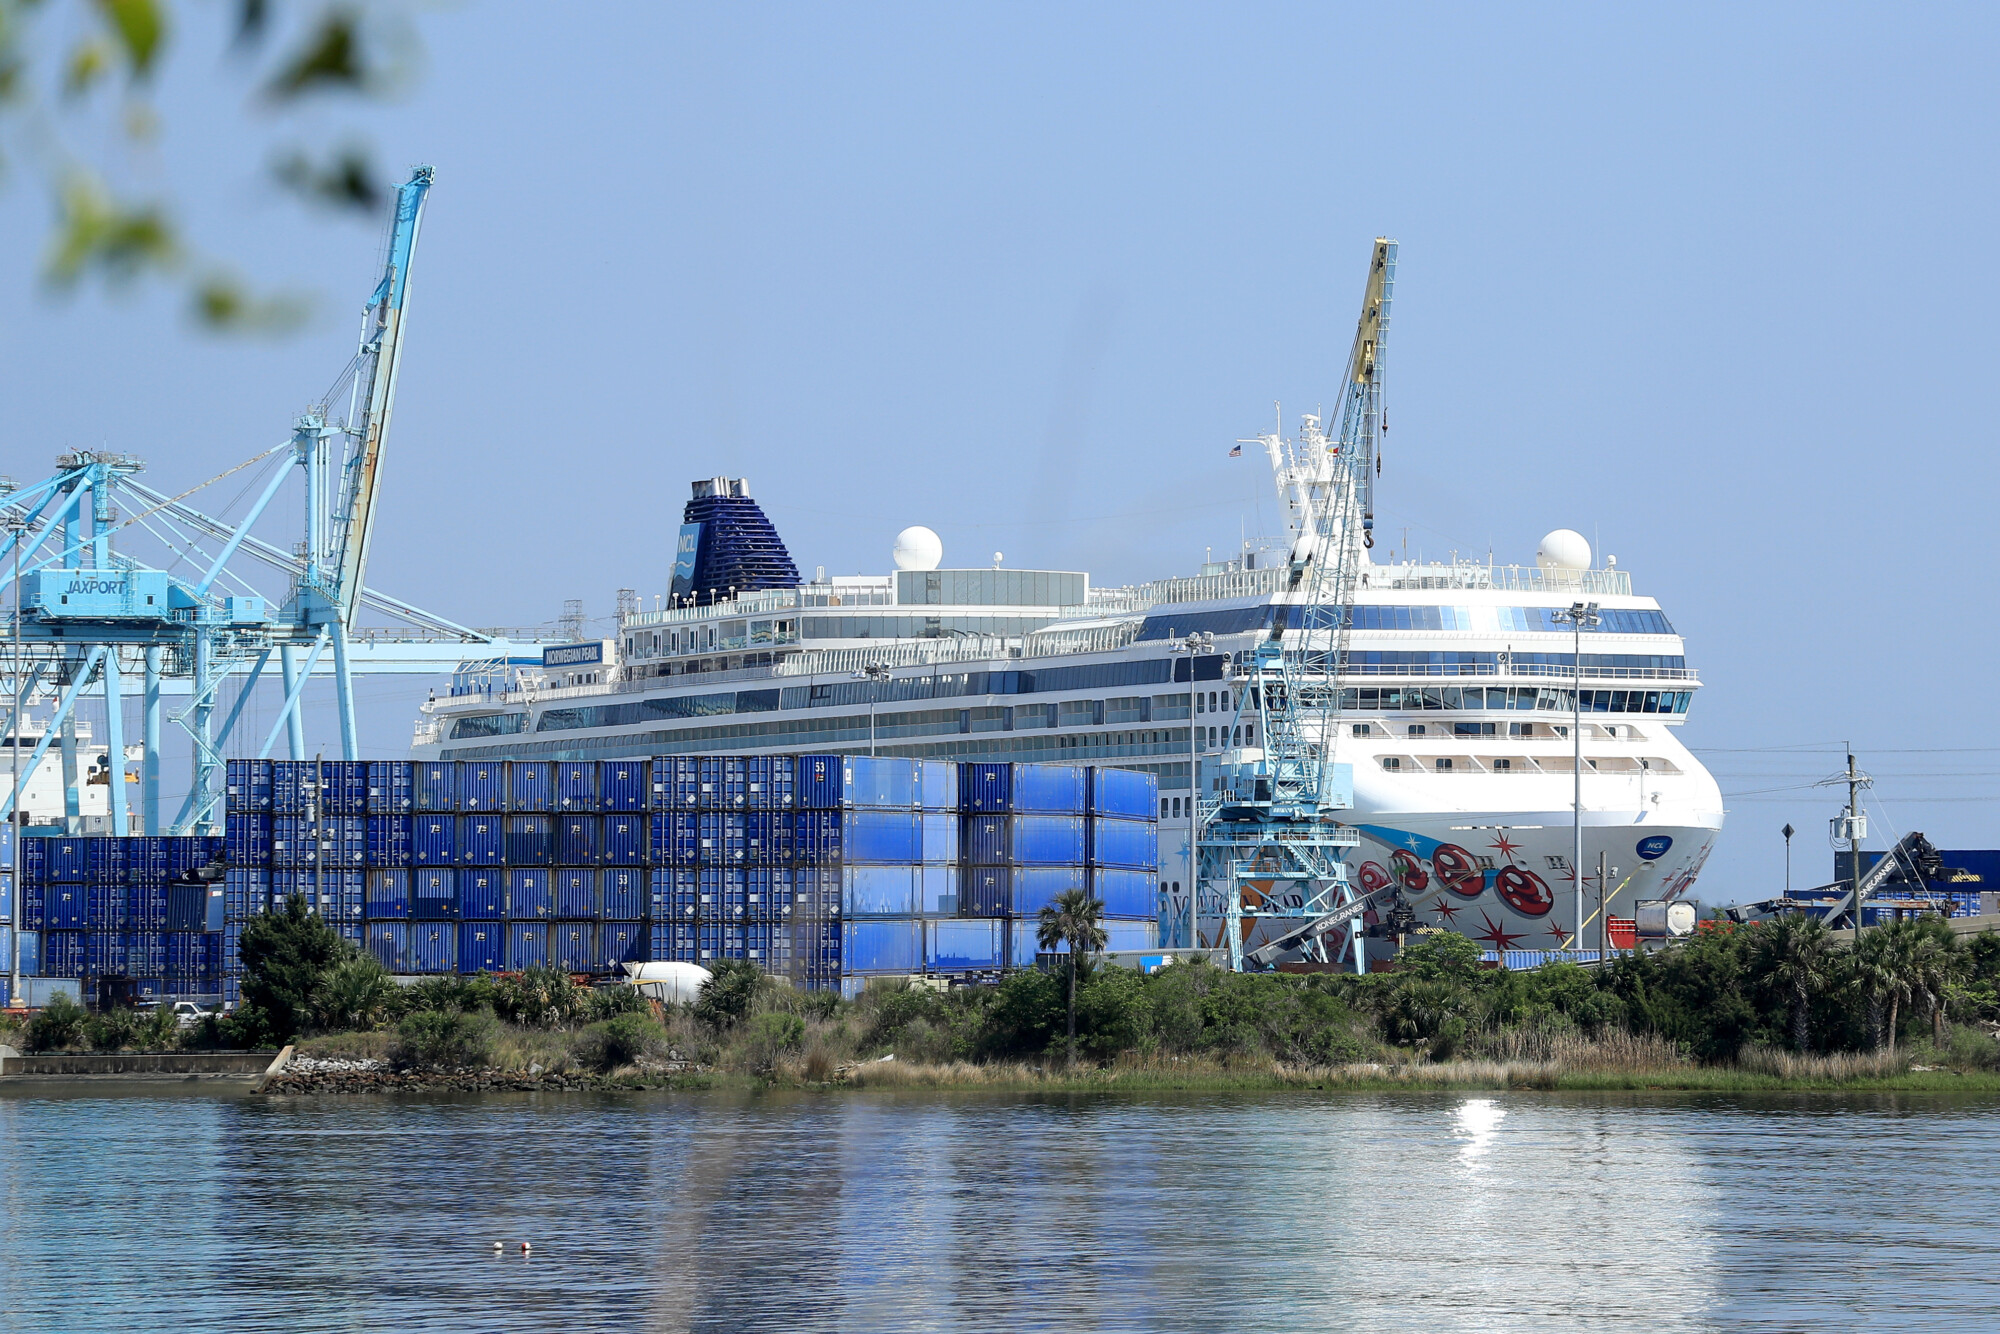 Major Cruise Company Suggests Skipping Florida’s Ports Because of Vaccine Passport Ban